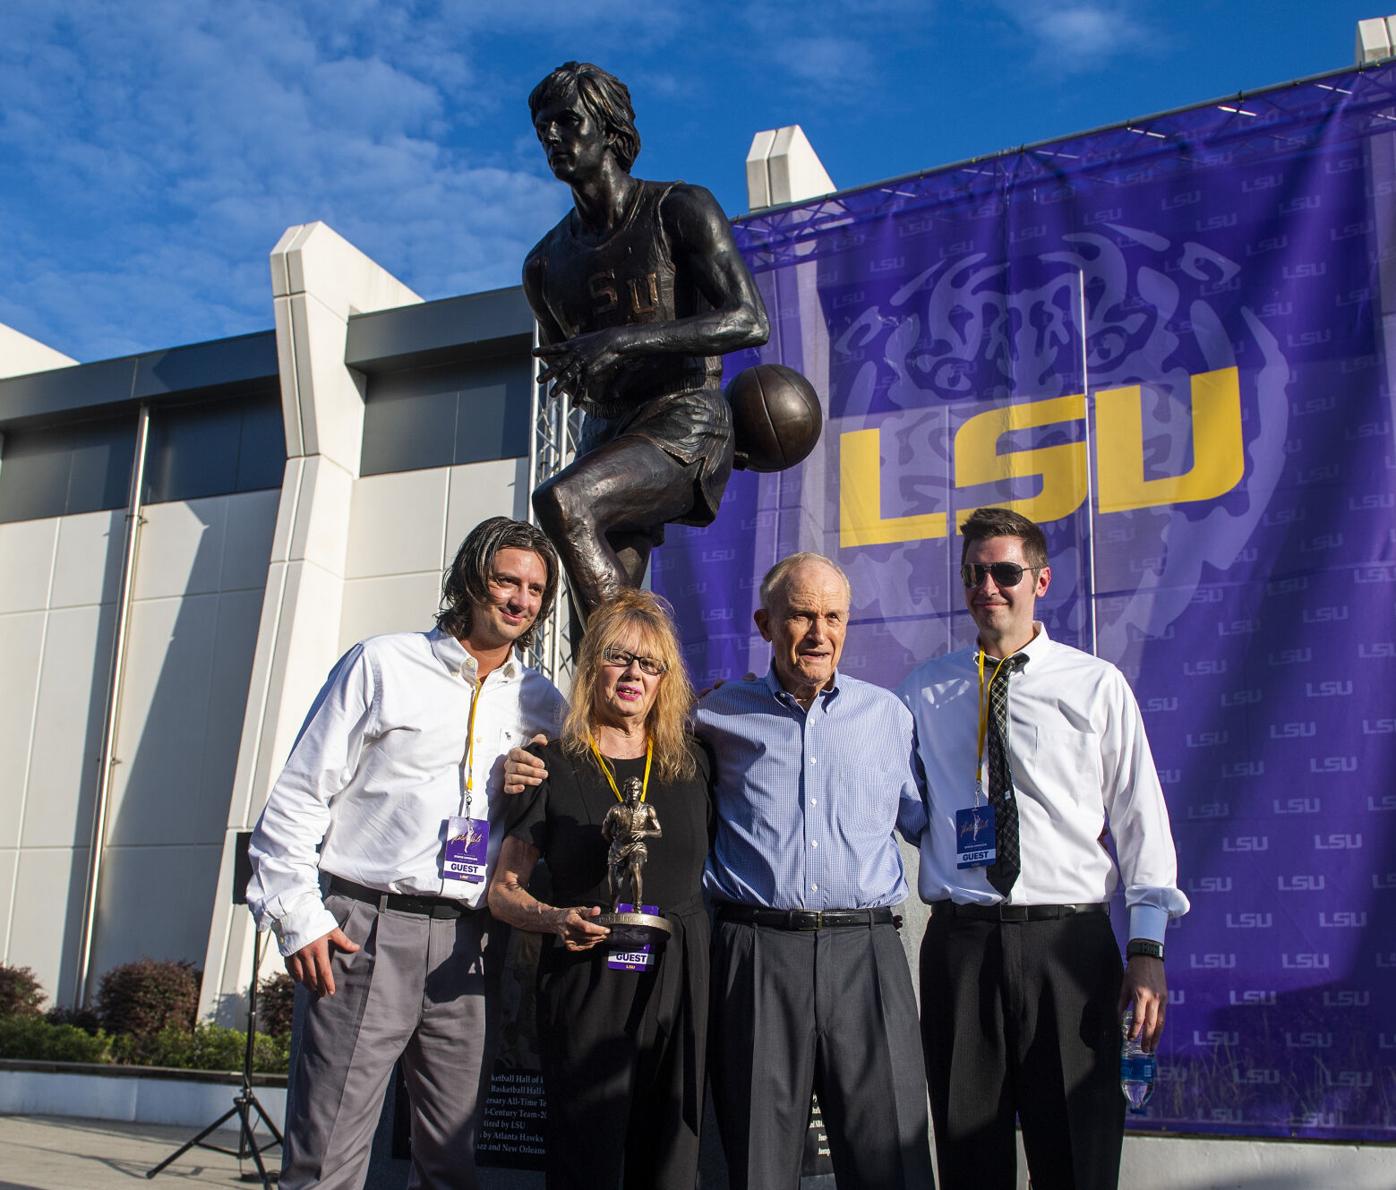 Fans Invited To Maravich Statue Unveiling Monday, July 25 – LSU